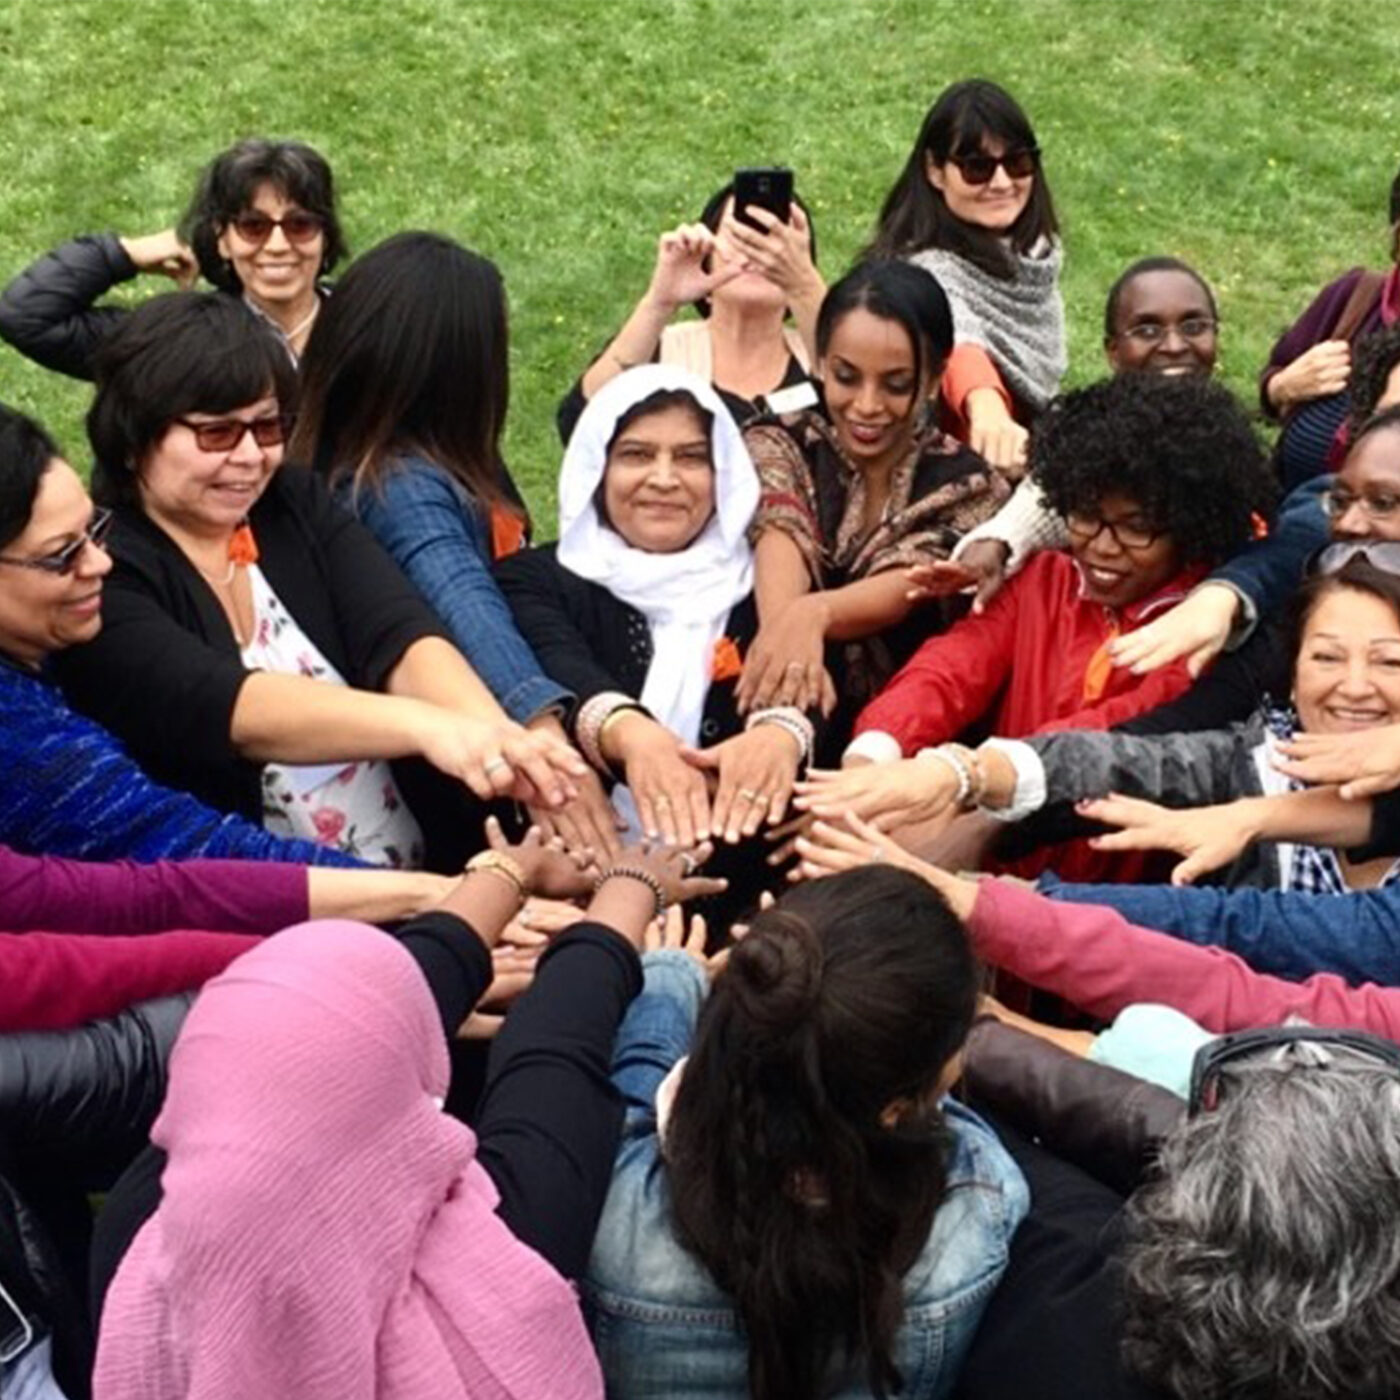 A large group of Black, Brown, white, and Indigenous women stand close together in a circle, smiling as their arms reach into the centre. Some are looking at the camera, others are taking pictures with their own phones.